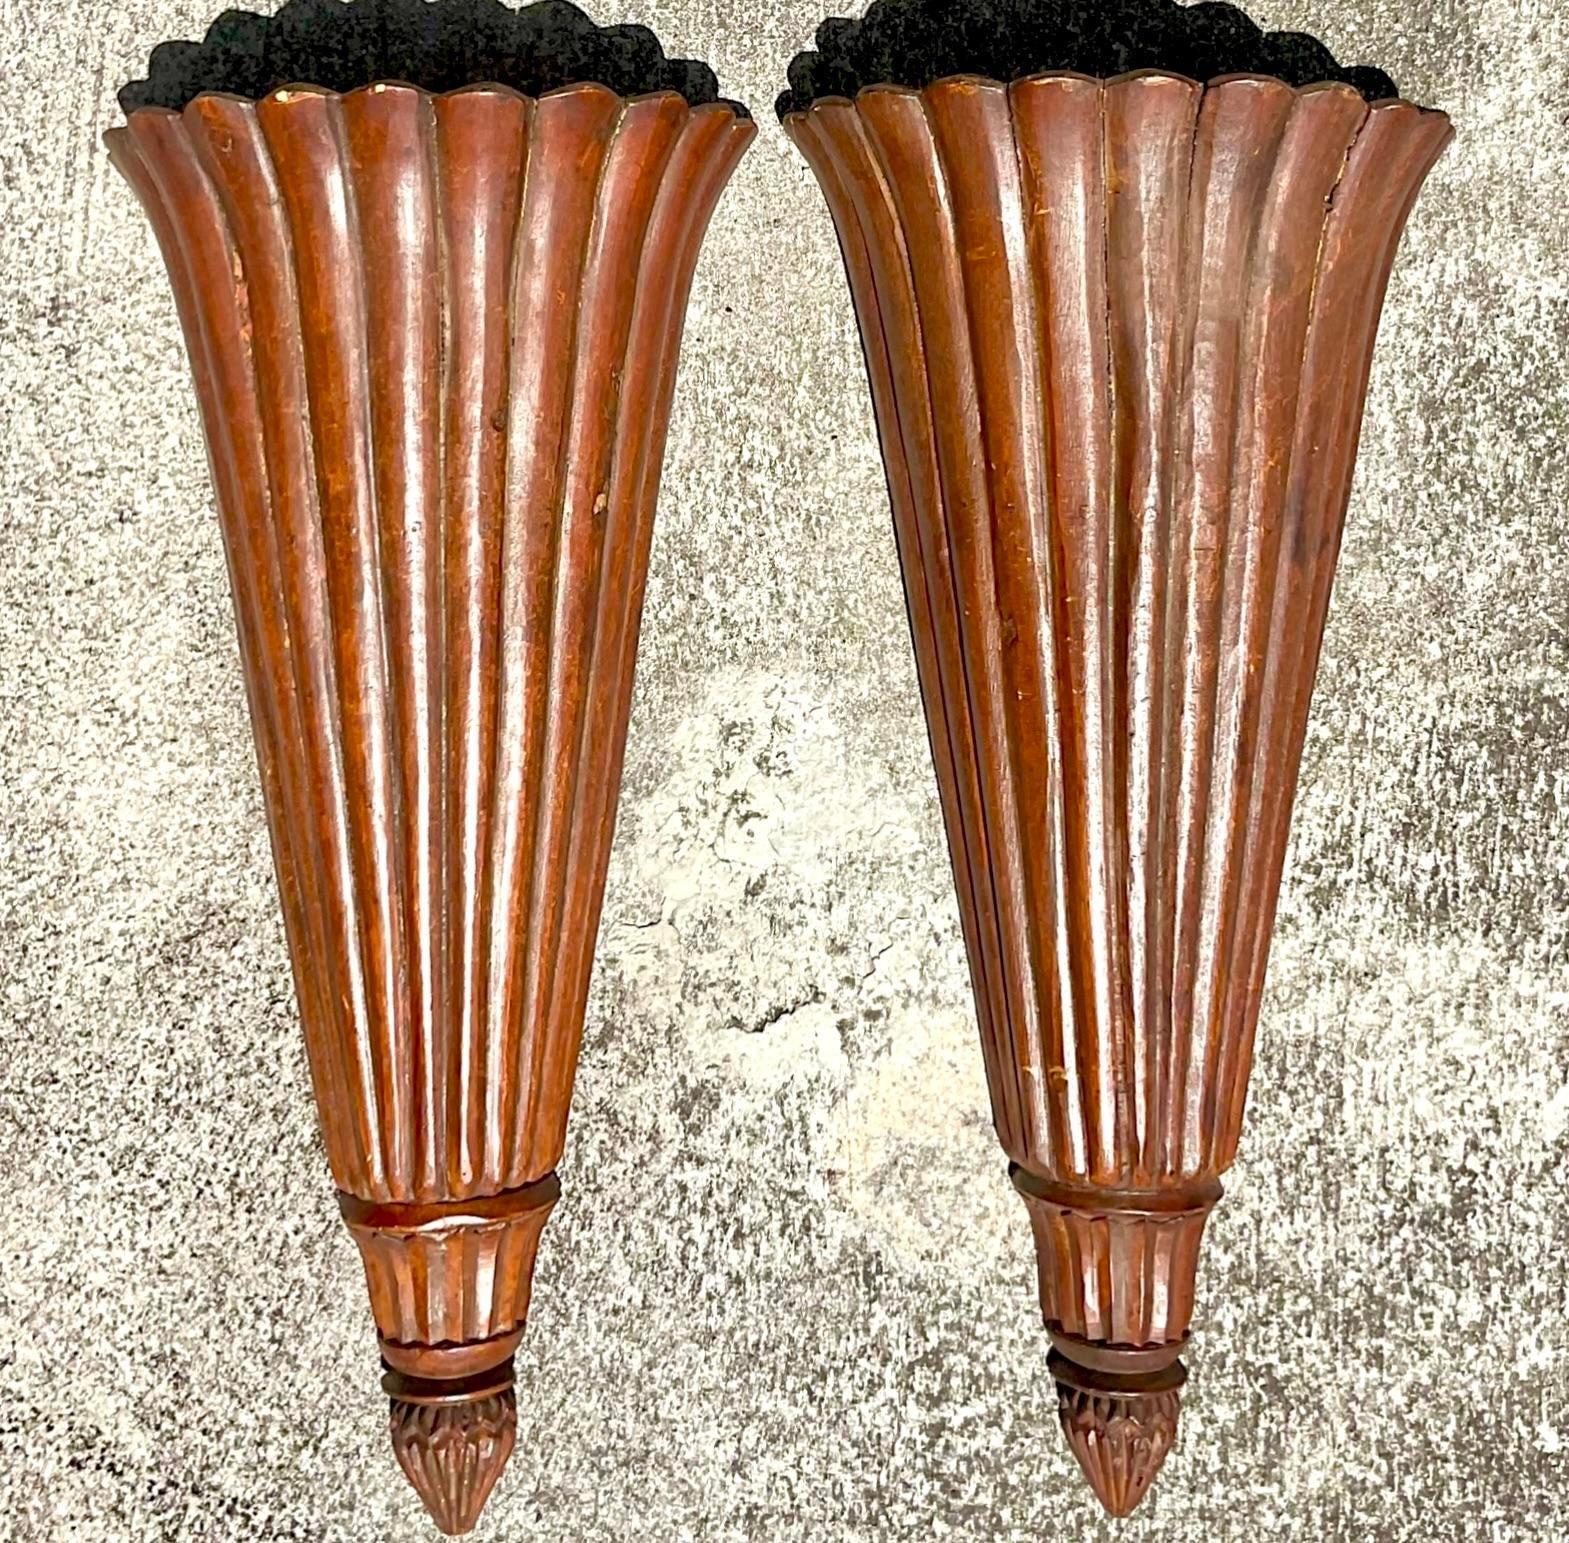 A stunning pair of vintage Boho wall sconces. A super chic pair of carved wood trumpet shaped fixtures with a ribbed design. Acquired from a Palm Beach estate.